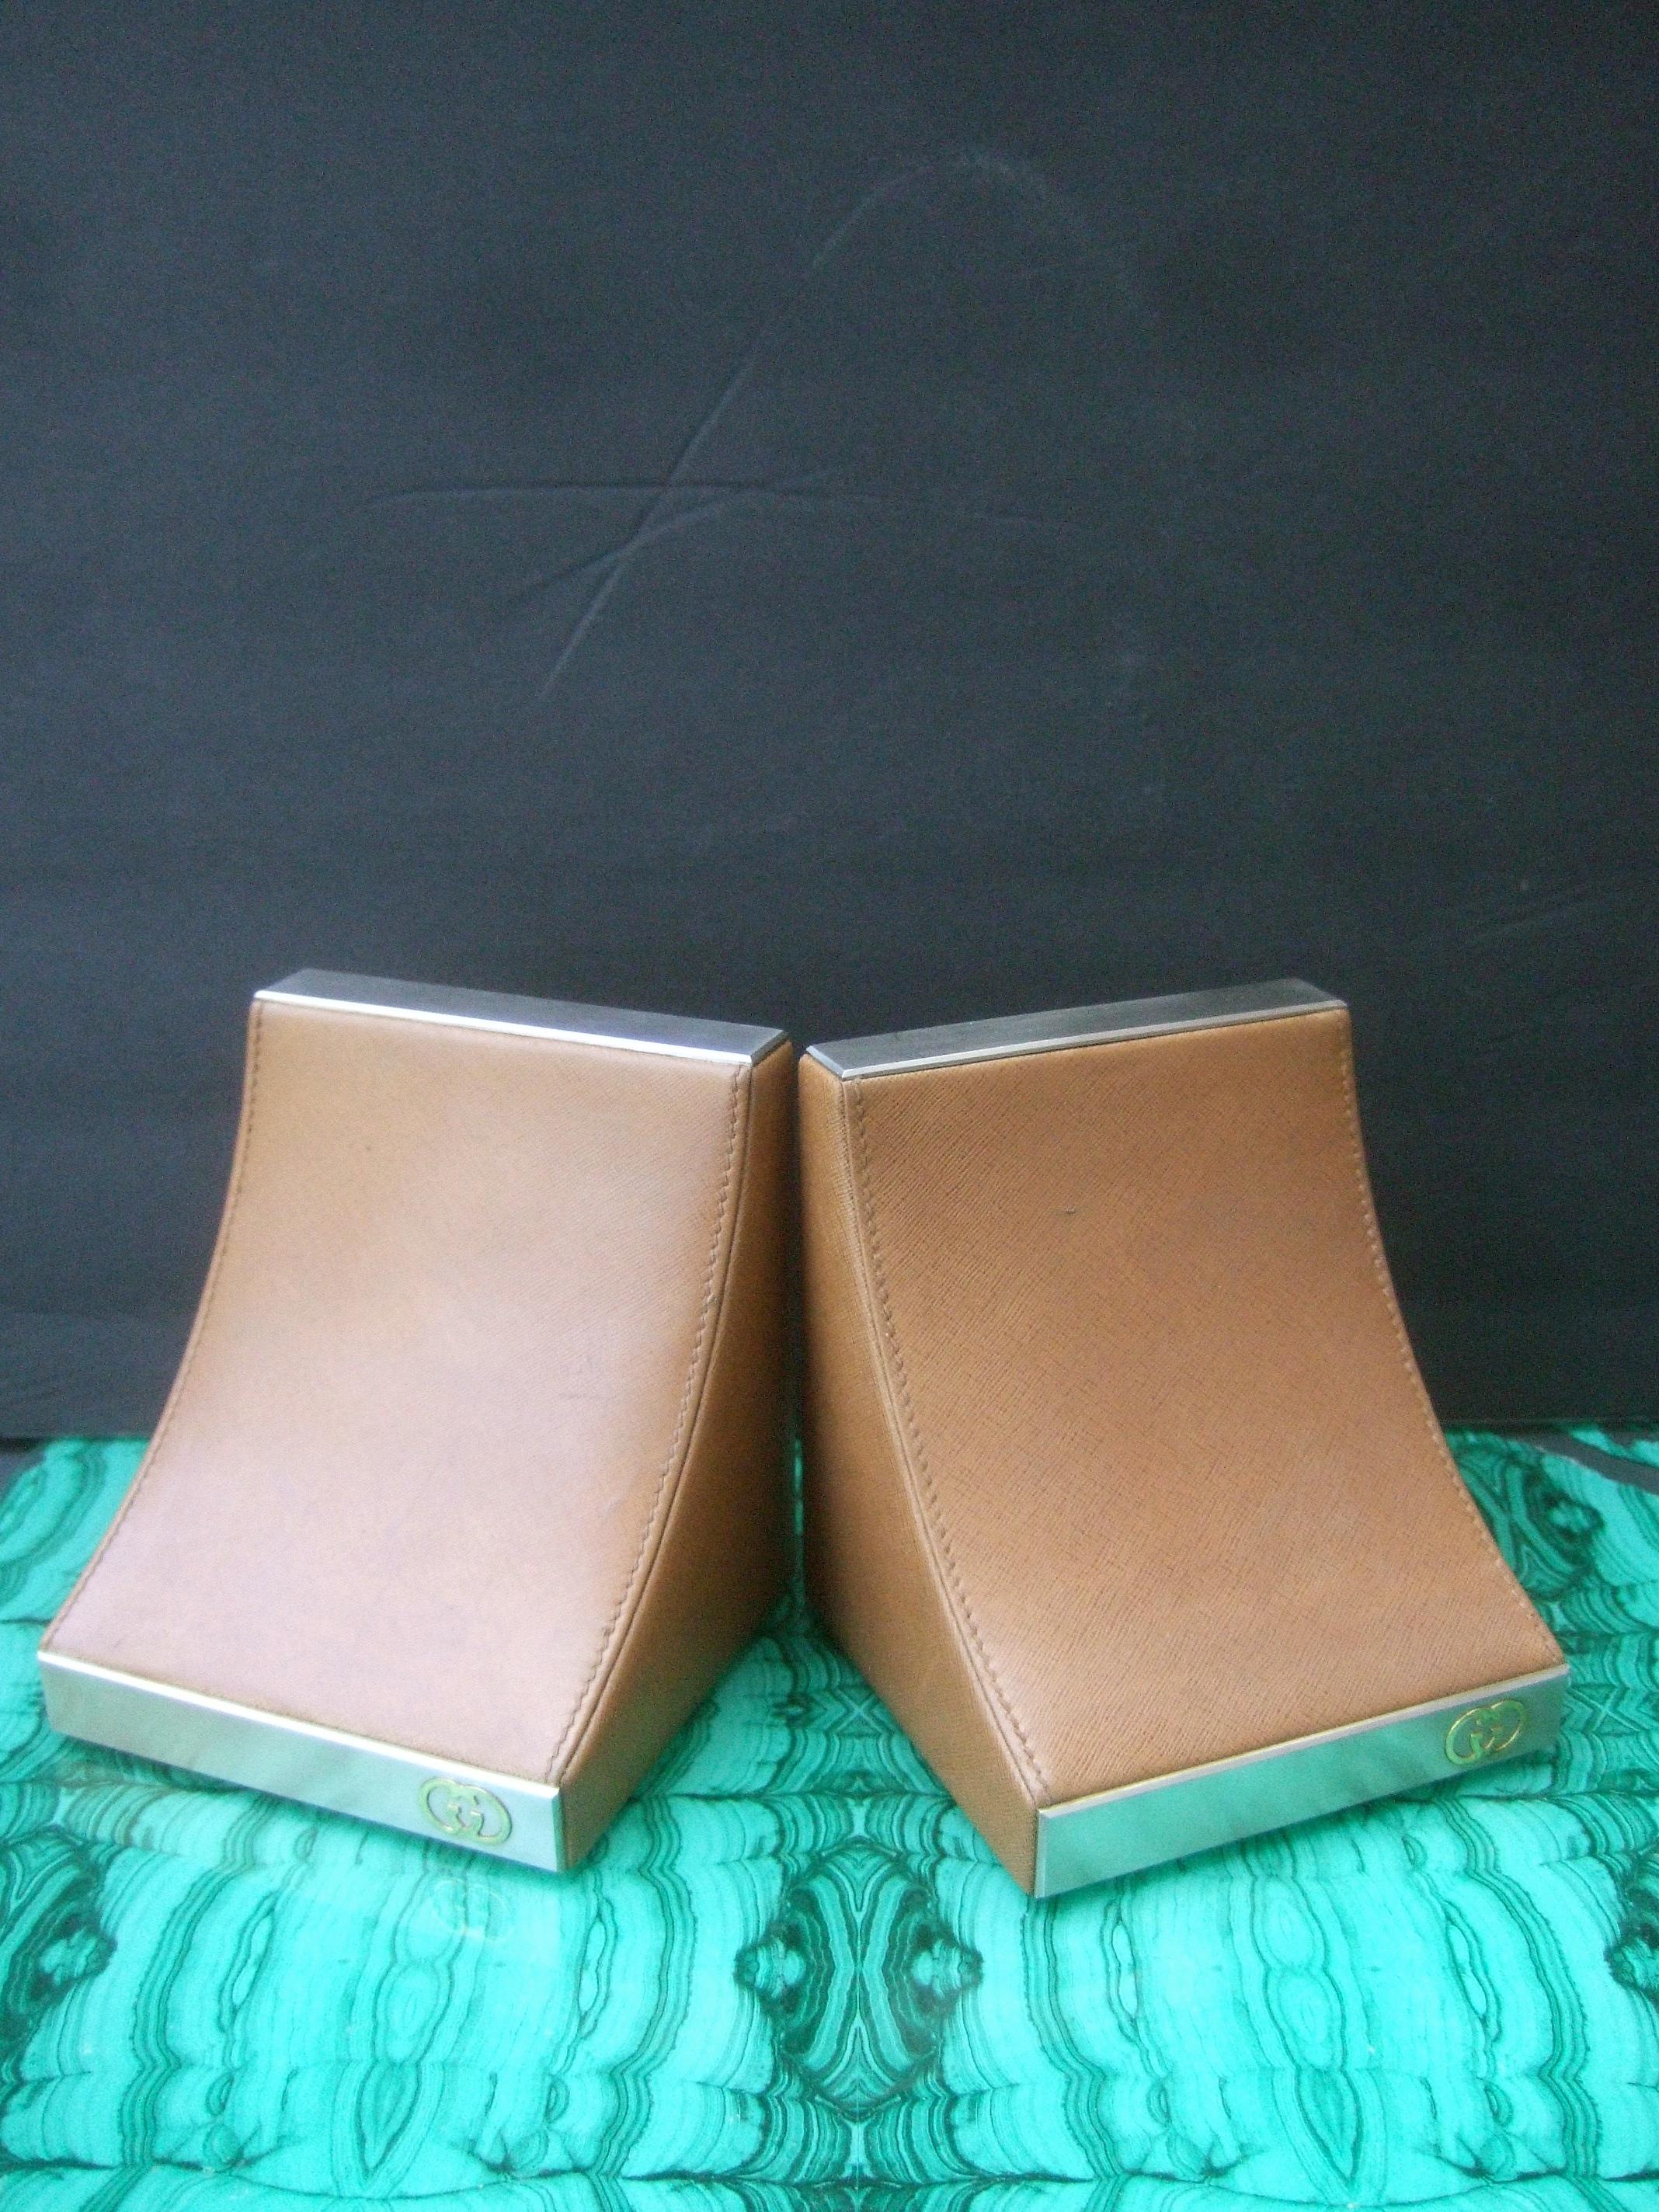 Gucci Italy Rare Caramel Brown Leather Pair of Bookends c 1970s  6